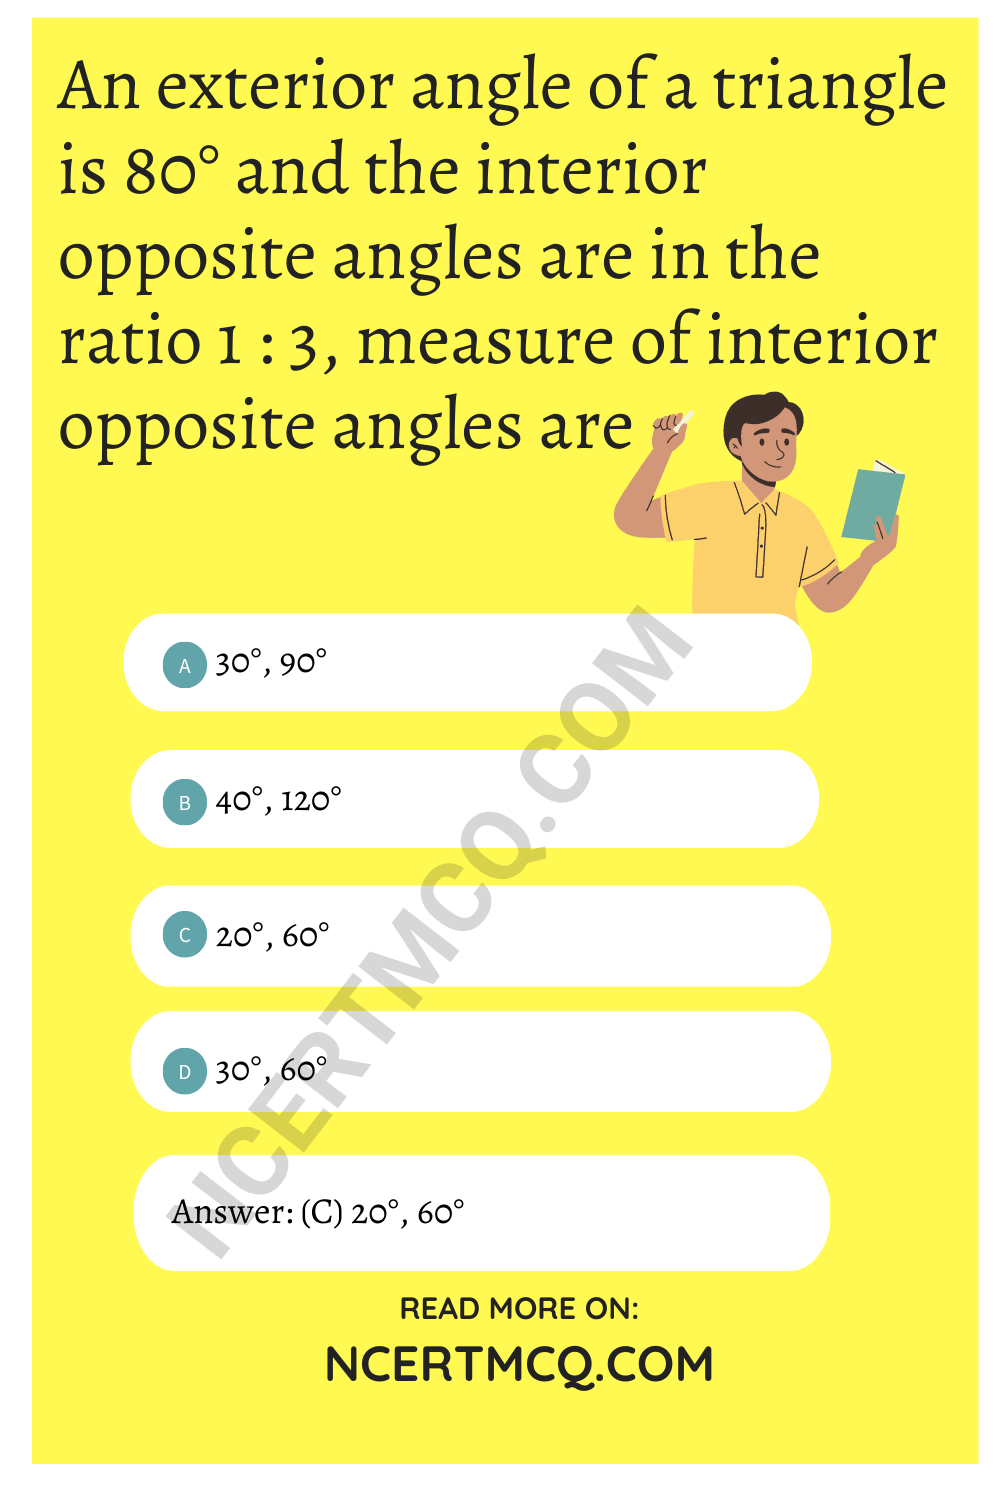 An exterior angle of a triangle is 80° and the interior opposite angles are in the ratio 1 : 3, measure of interior opposite angles are